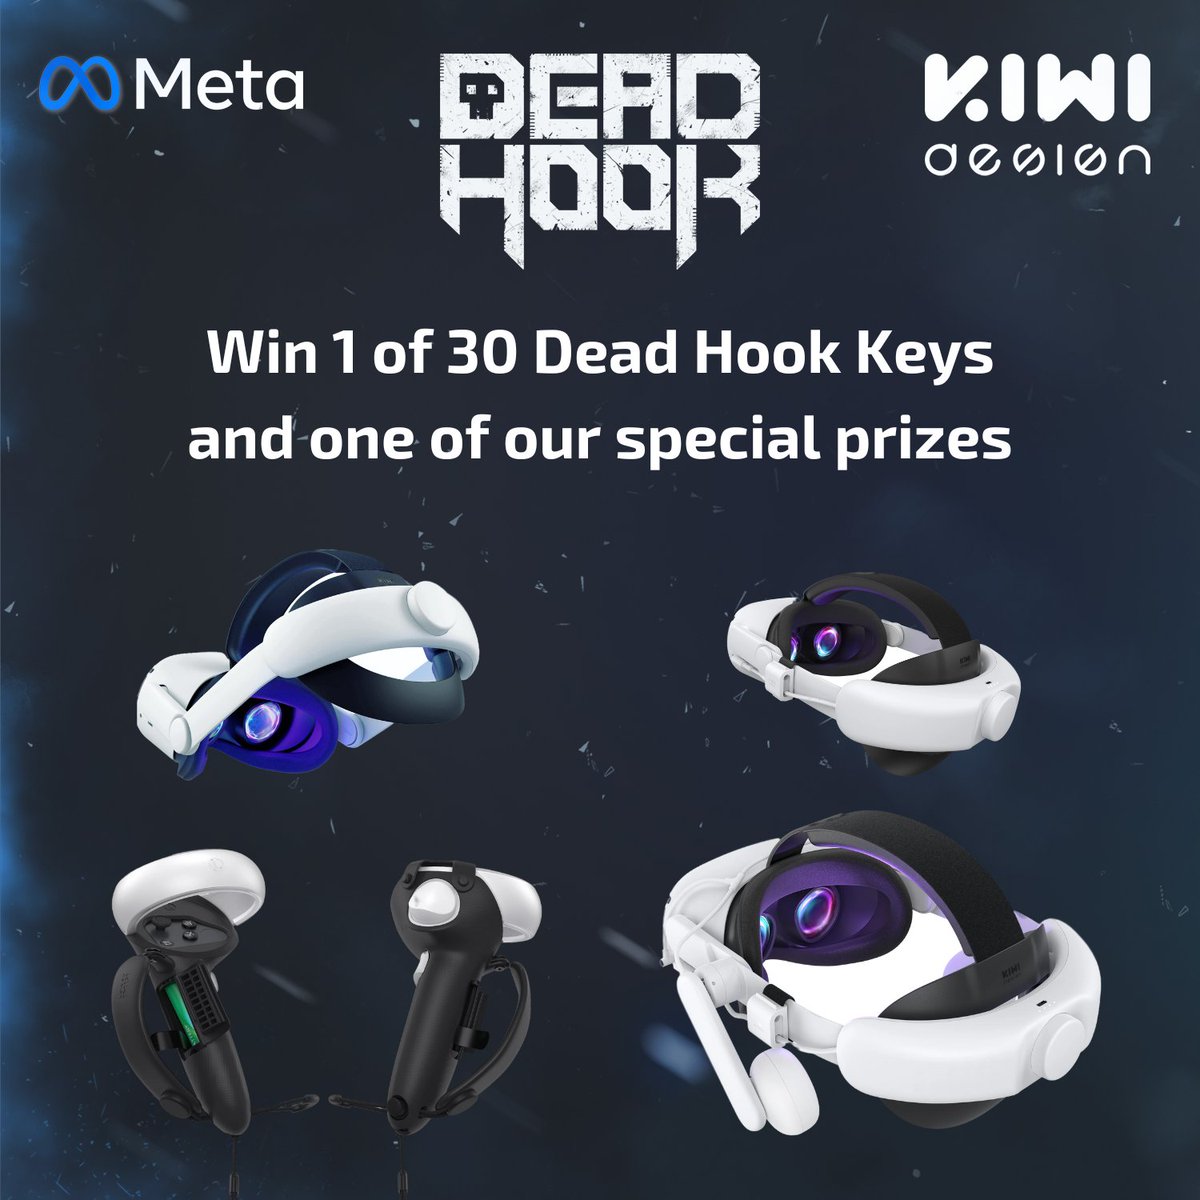 We're hosting a special giveaway where you can not only win game keys, but also amazing prizes from our partners @KIWIdesign_shop  🎁 

Check out the details in the images below and enter for a chance to win.

To enter, simply follow the link: joyway.games/deadhook-givea…